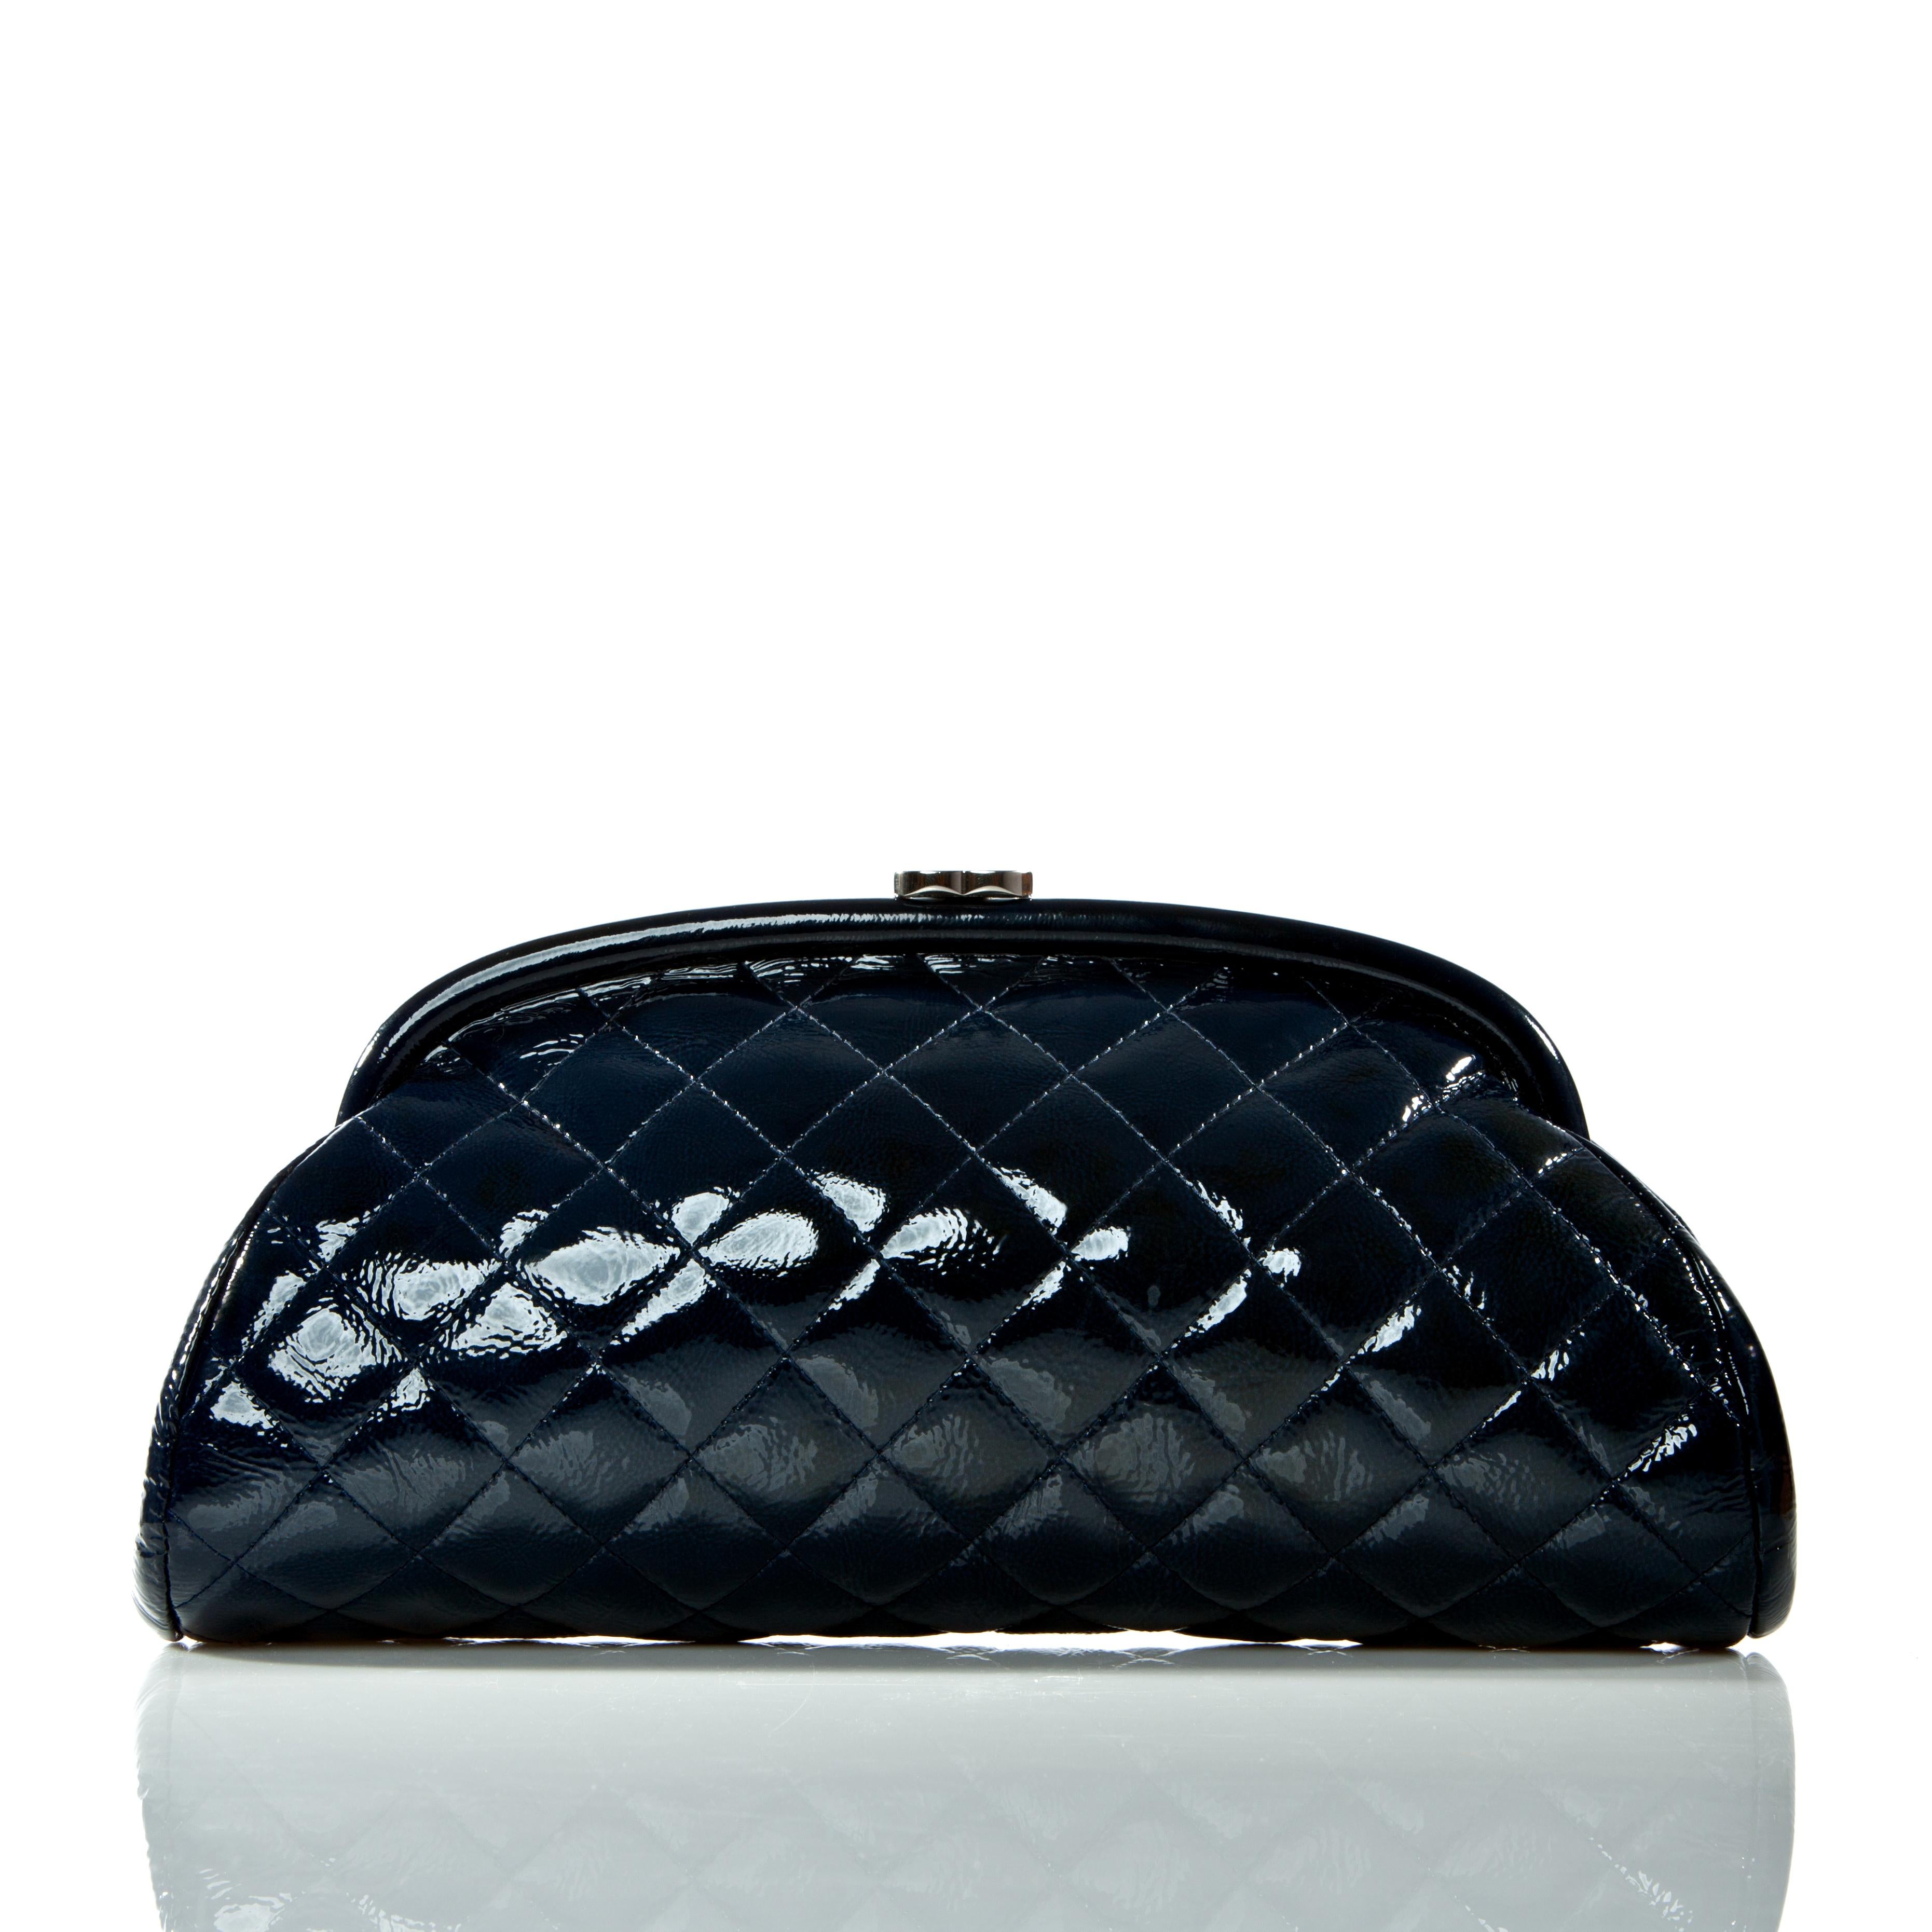 Chanel 2007 Classic Vintage Navy Blue Patent Diamond Quilted Timeless Clutch Bag (Schwarz) im Angebot